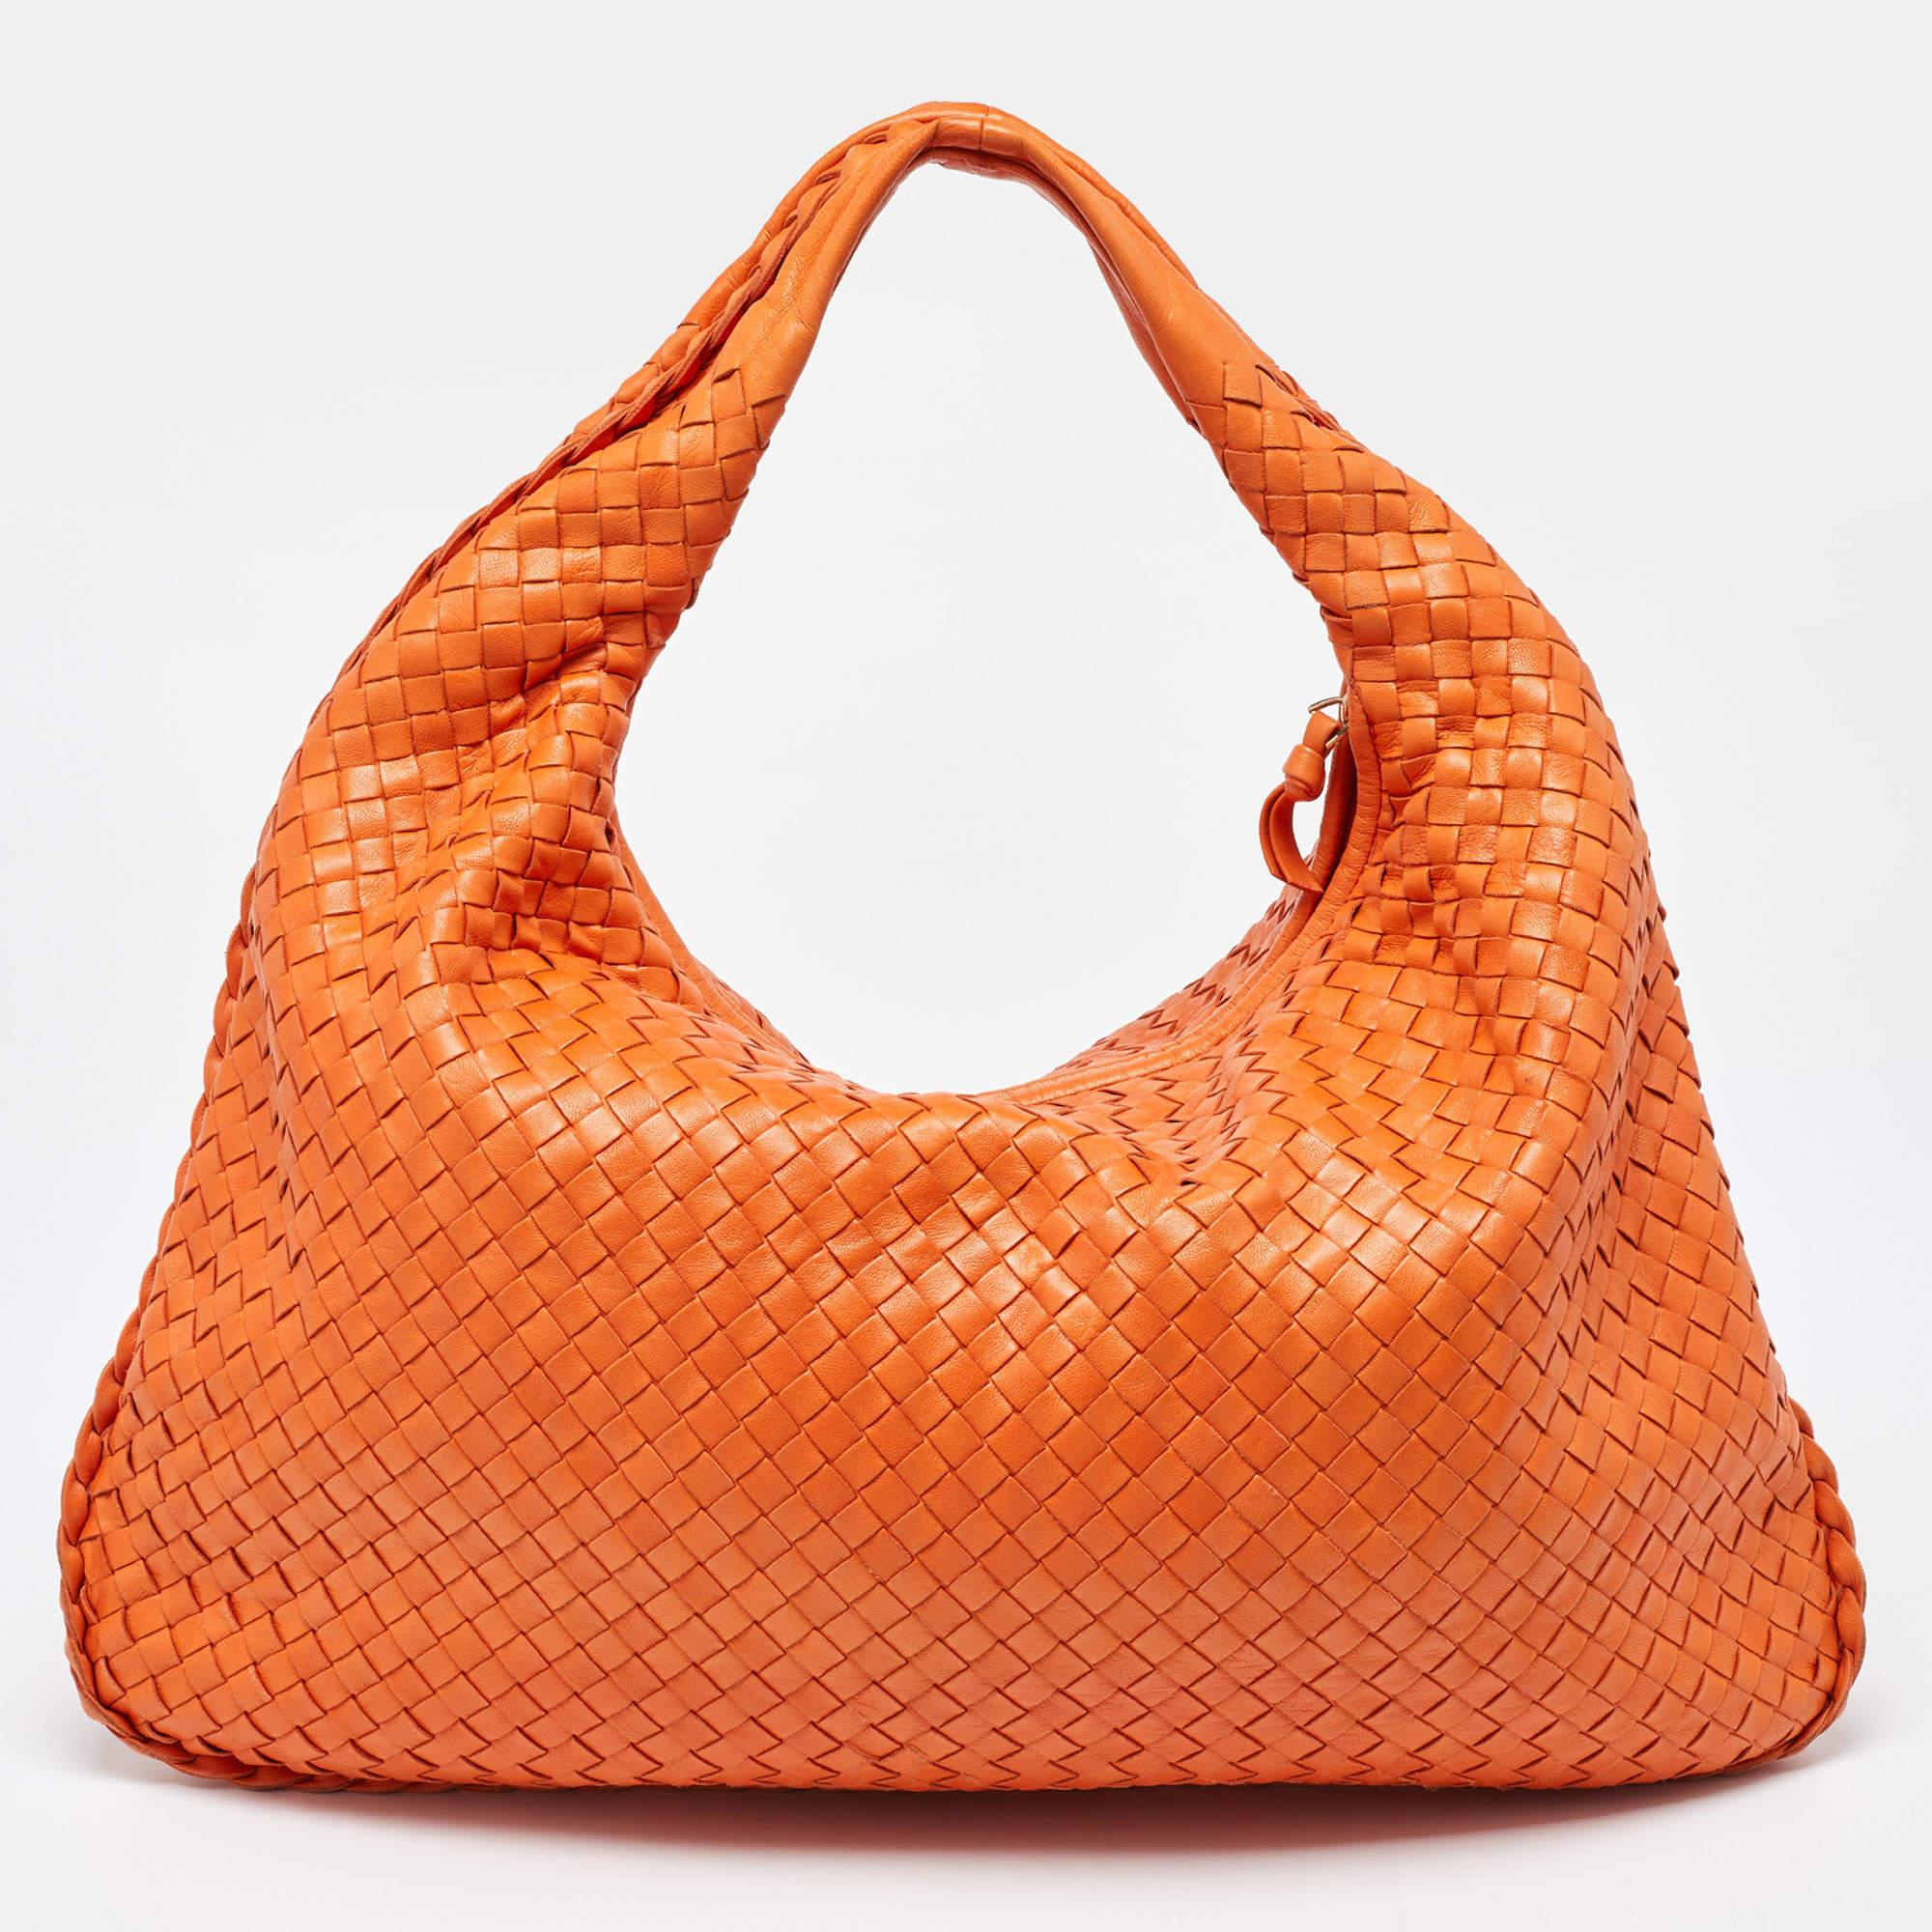 Stylish handbags never fail to make a fashionable impression. Make this designer hobo yours by pairing it with your sophisticated workwear as well as chic casual looks.

Includes: Mirror, Info Booklet